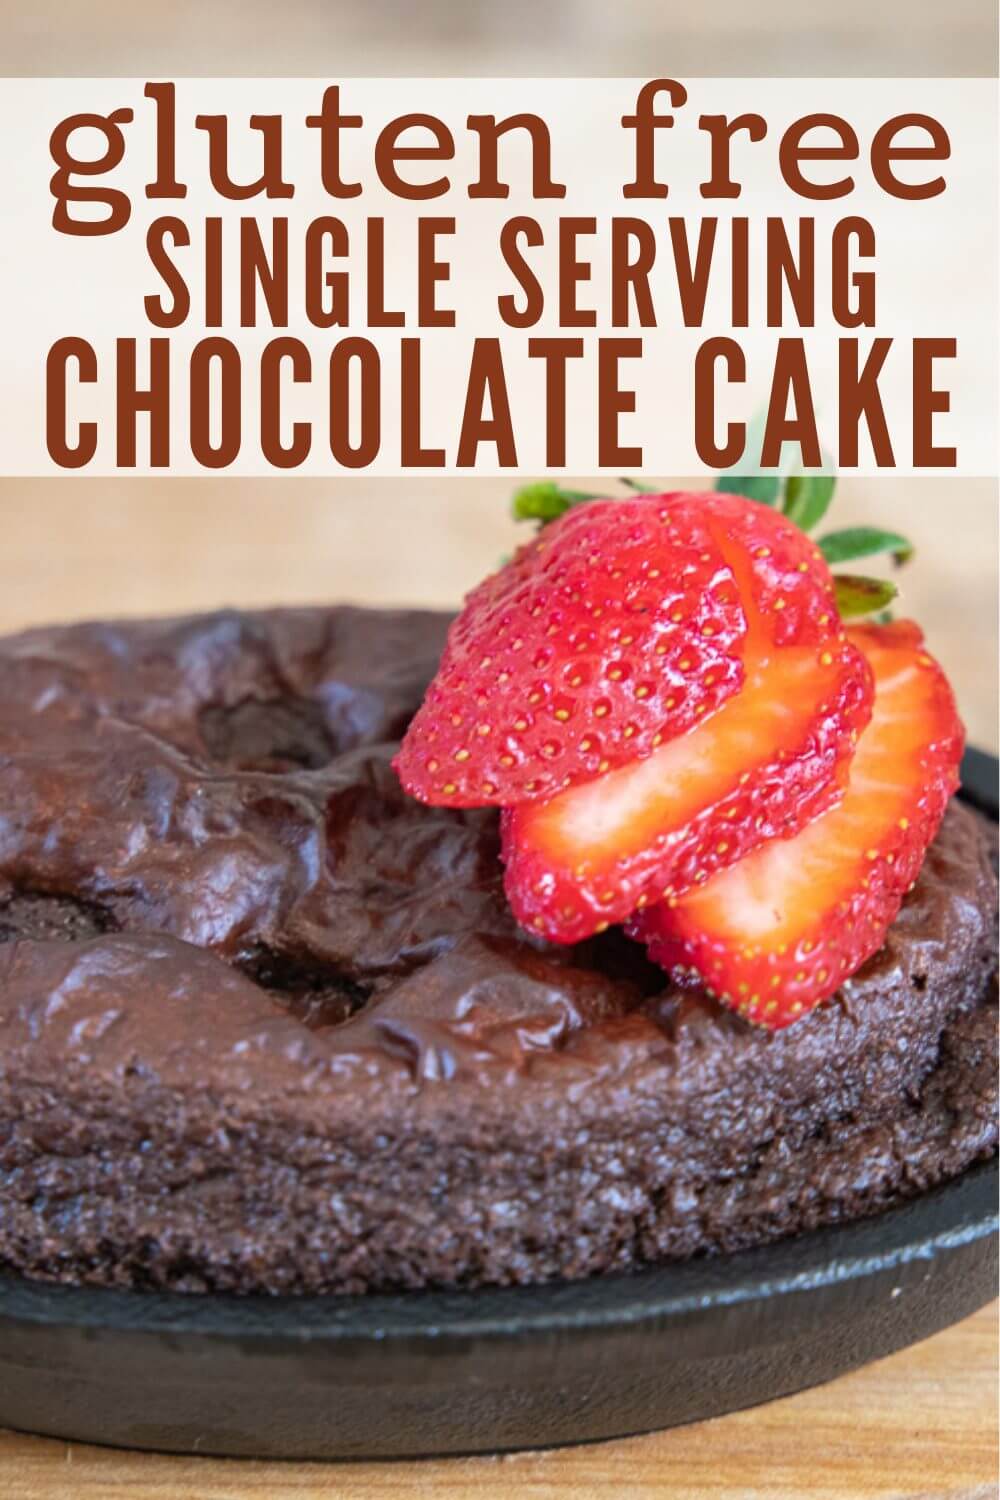 Amazing gluten free chocolate cake made with simple kitchen ingredients. These also uses individual mini cakes perfect for entertaining or to make for someone that cant have traditional cake. This is an amazing option!